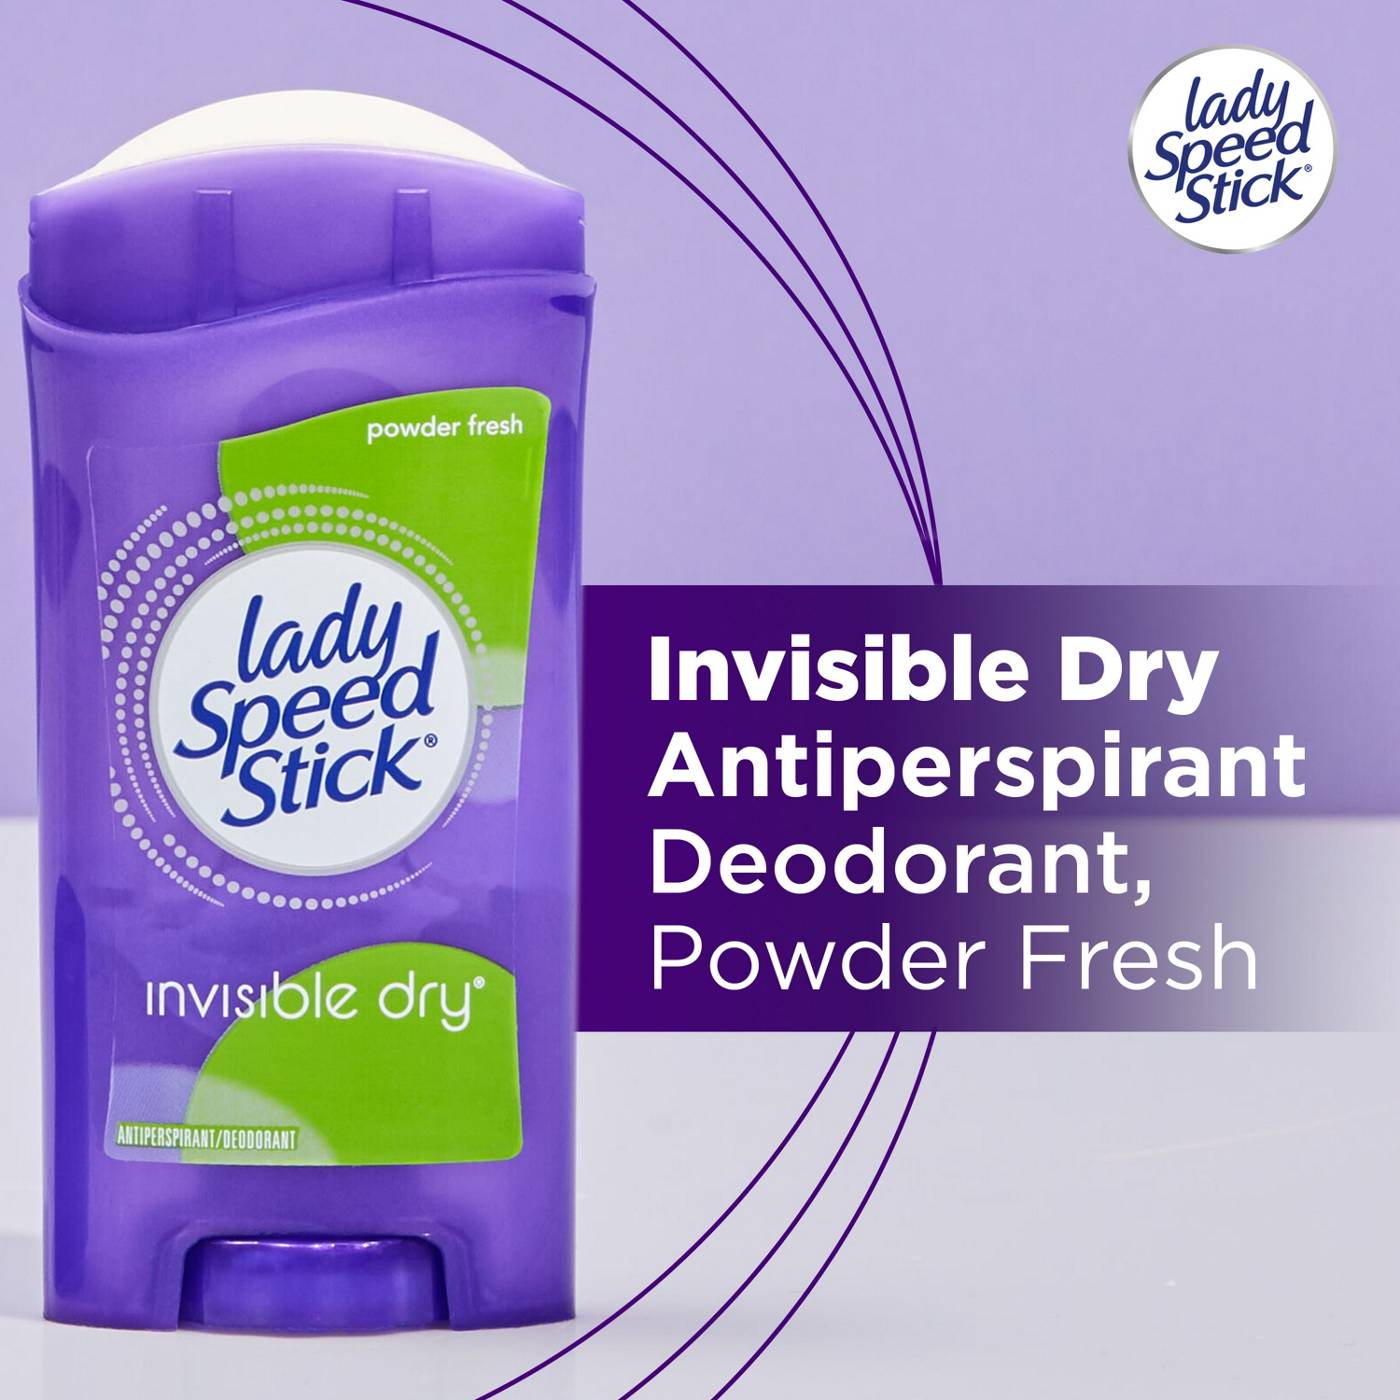 Lady Speed Stick Invisible Dry Deodorant - Powder Fresh; image 9 of 9